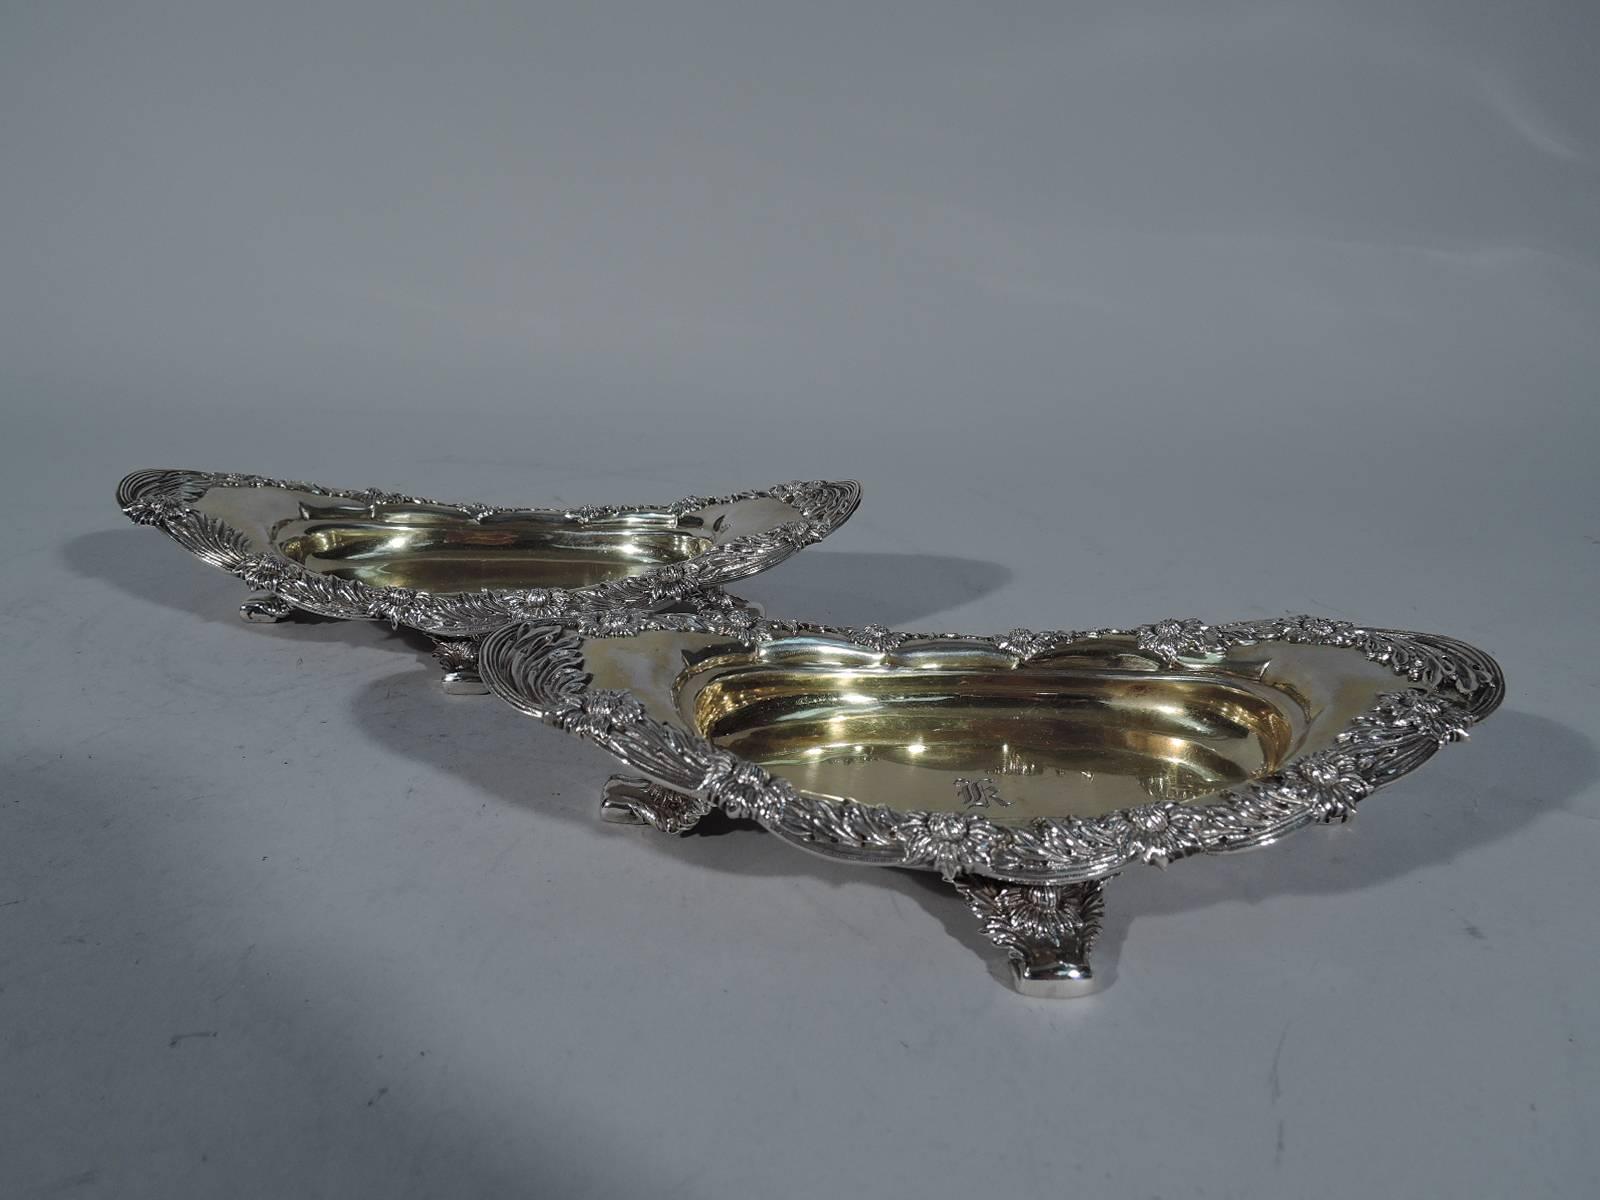 Pair of sterling silver bowls in Chrysanthemum pattern. Made by Tiffany & Co. in New York. Each: shallow oval well and oval rim with overhanding sides and elongated ends. Rests on four supports. A profusion of chrysanthemums on rim and supports.